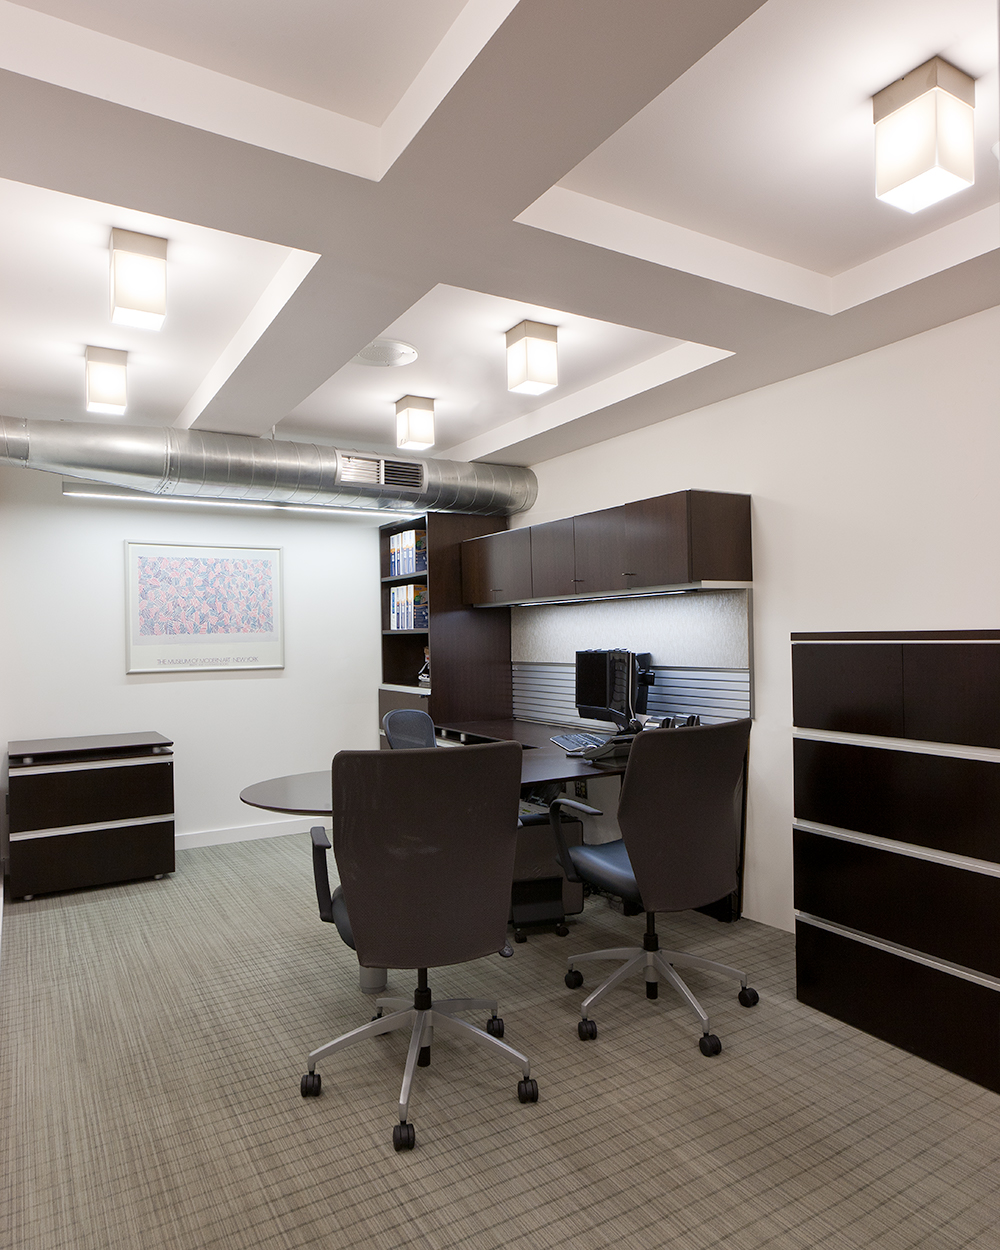 These custom light fixtures are clean, rectangular downlights for a sophisticated white and brown themed office.